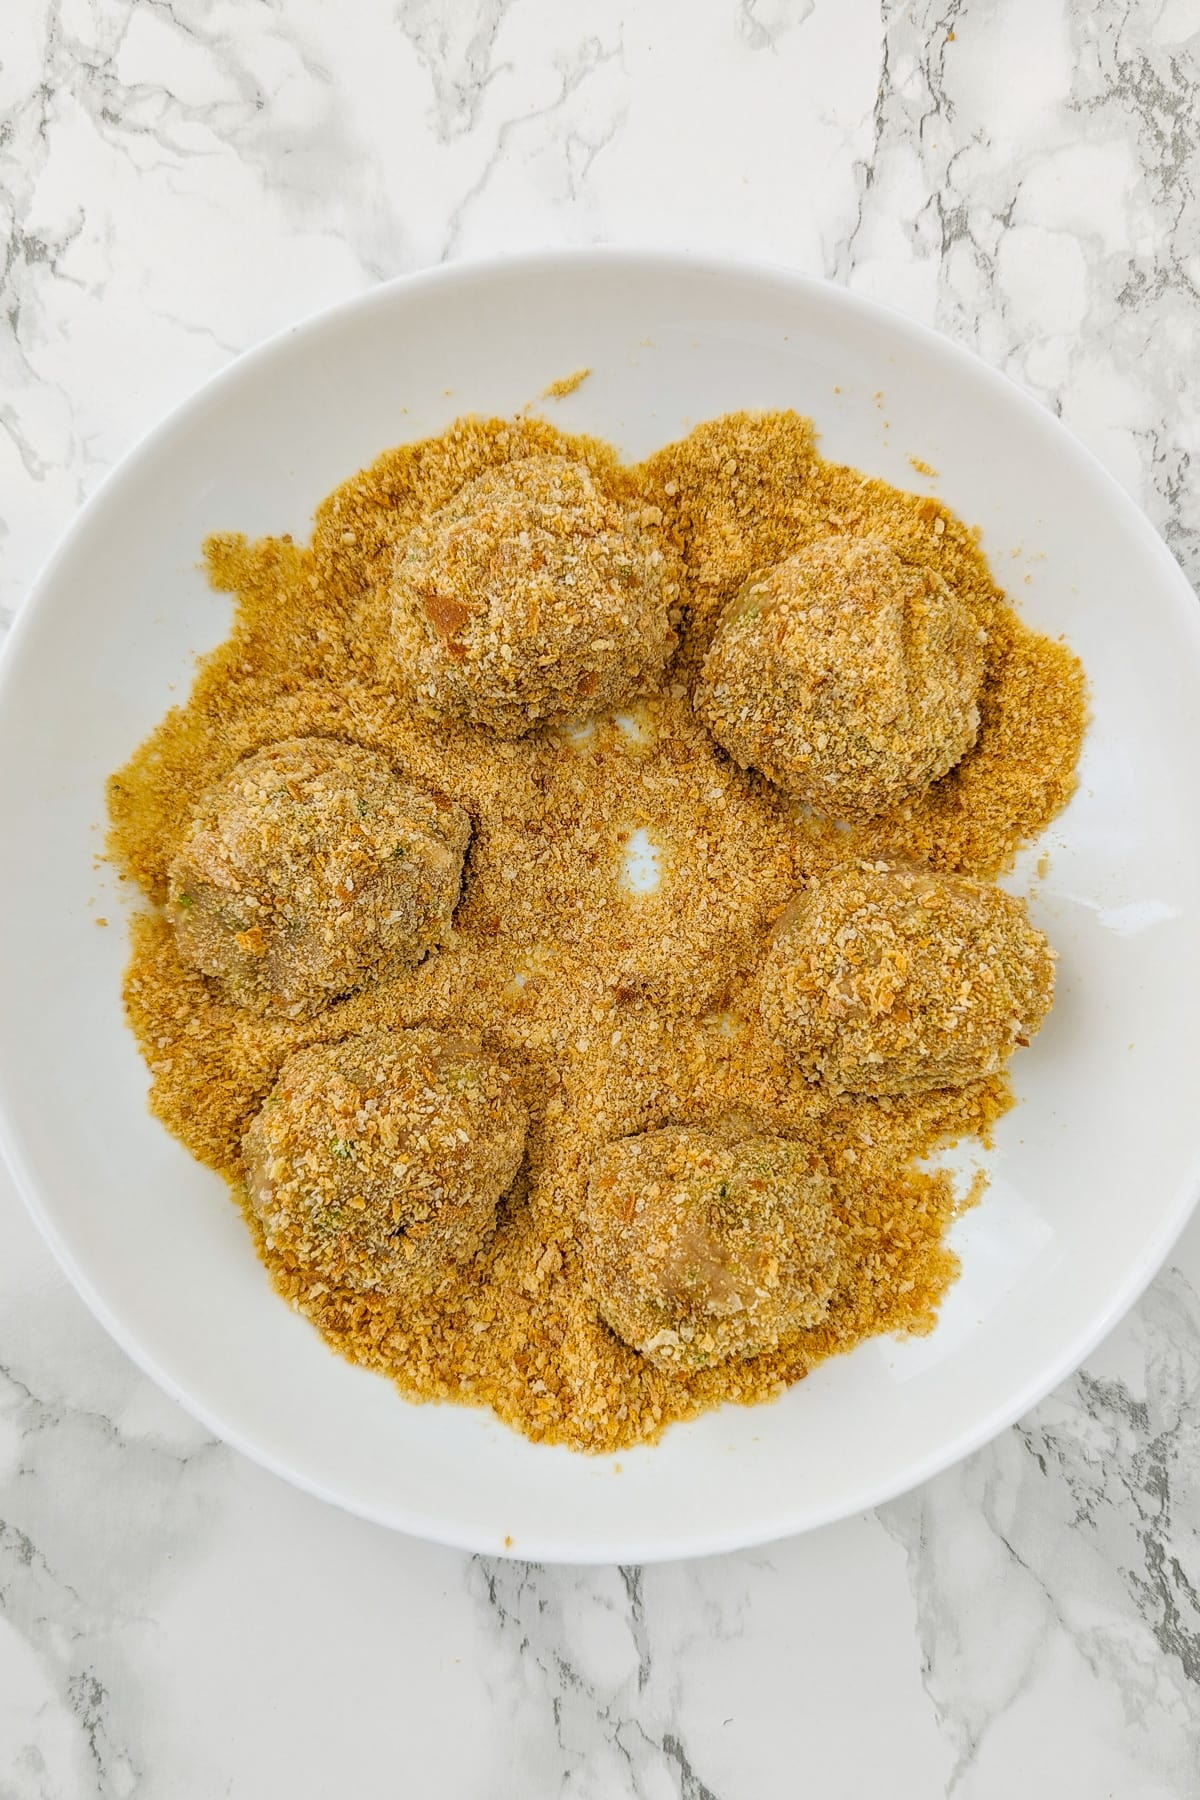 Top view of a white plate with breadcrumbs and meatballs.